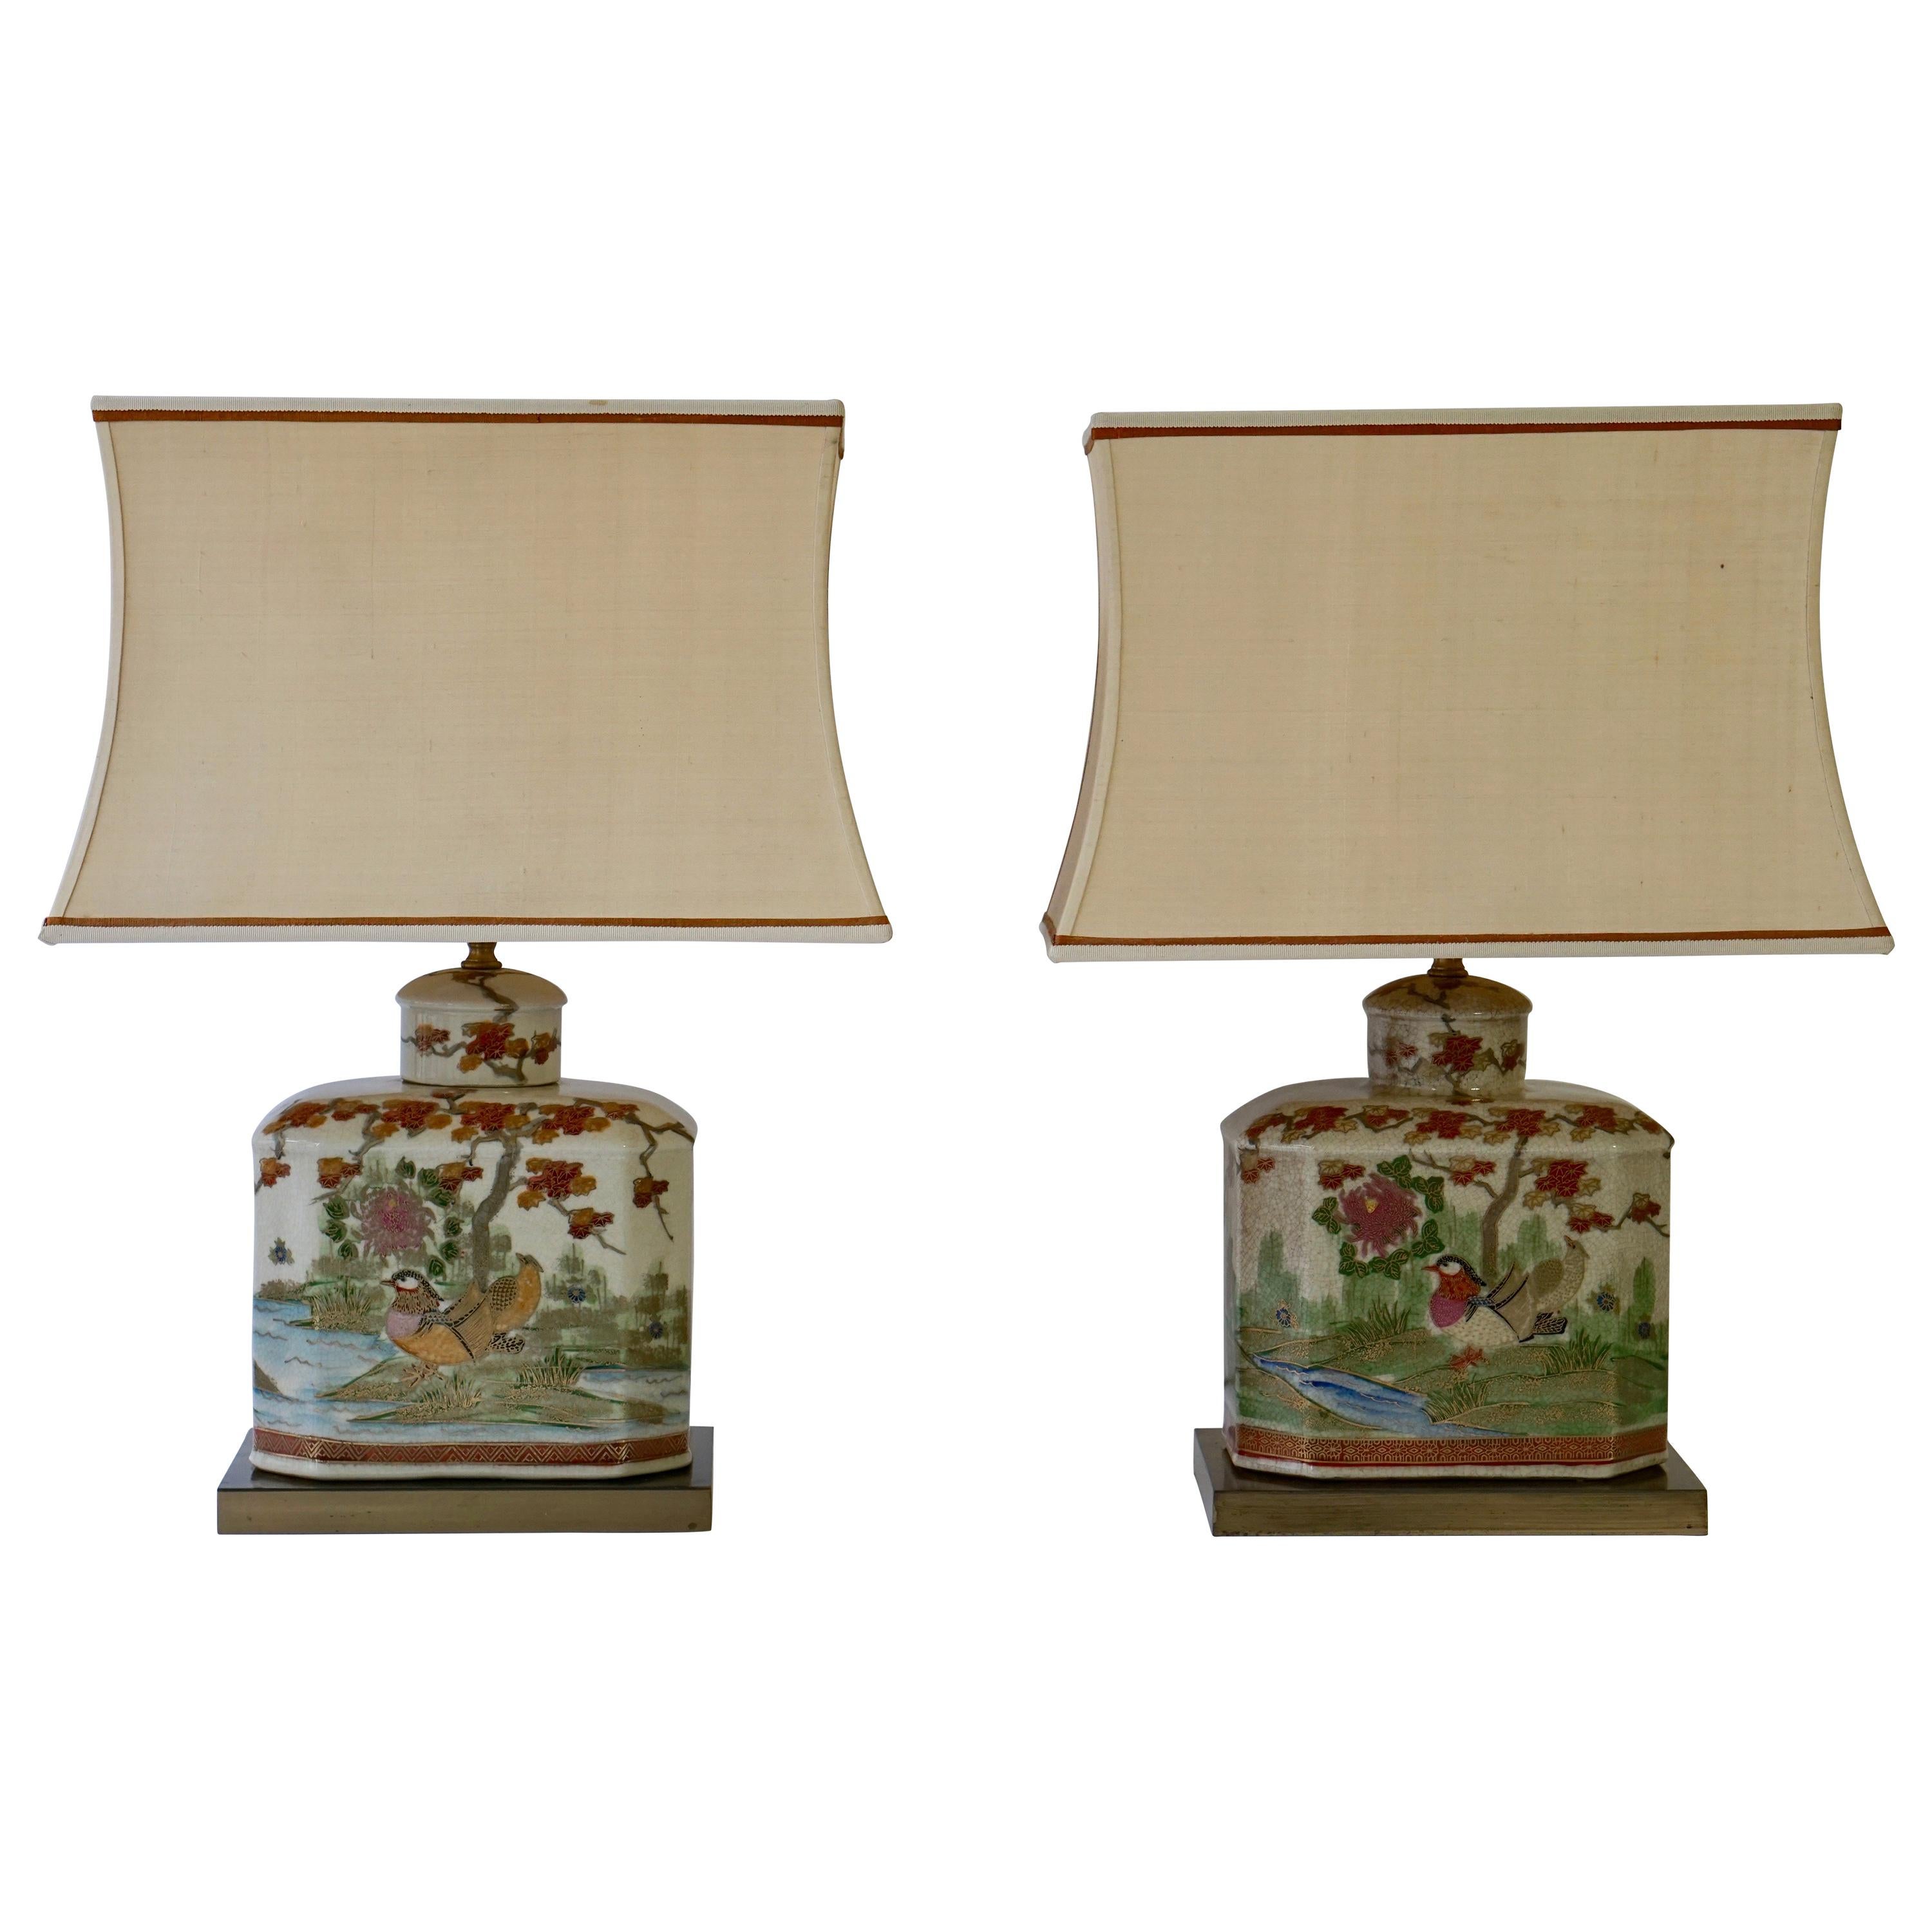 Pair of Satsuma Japanese Lamp Vases with Brass Base